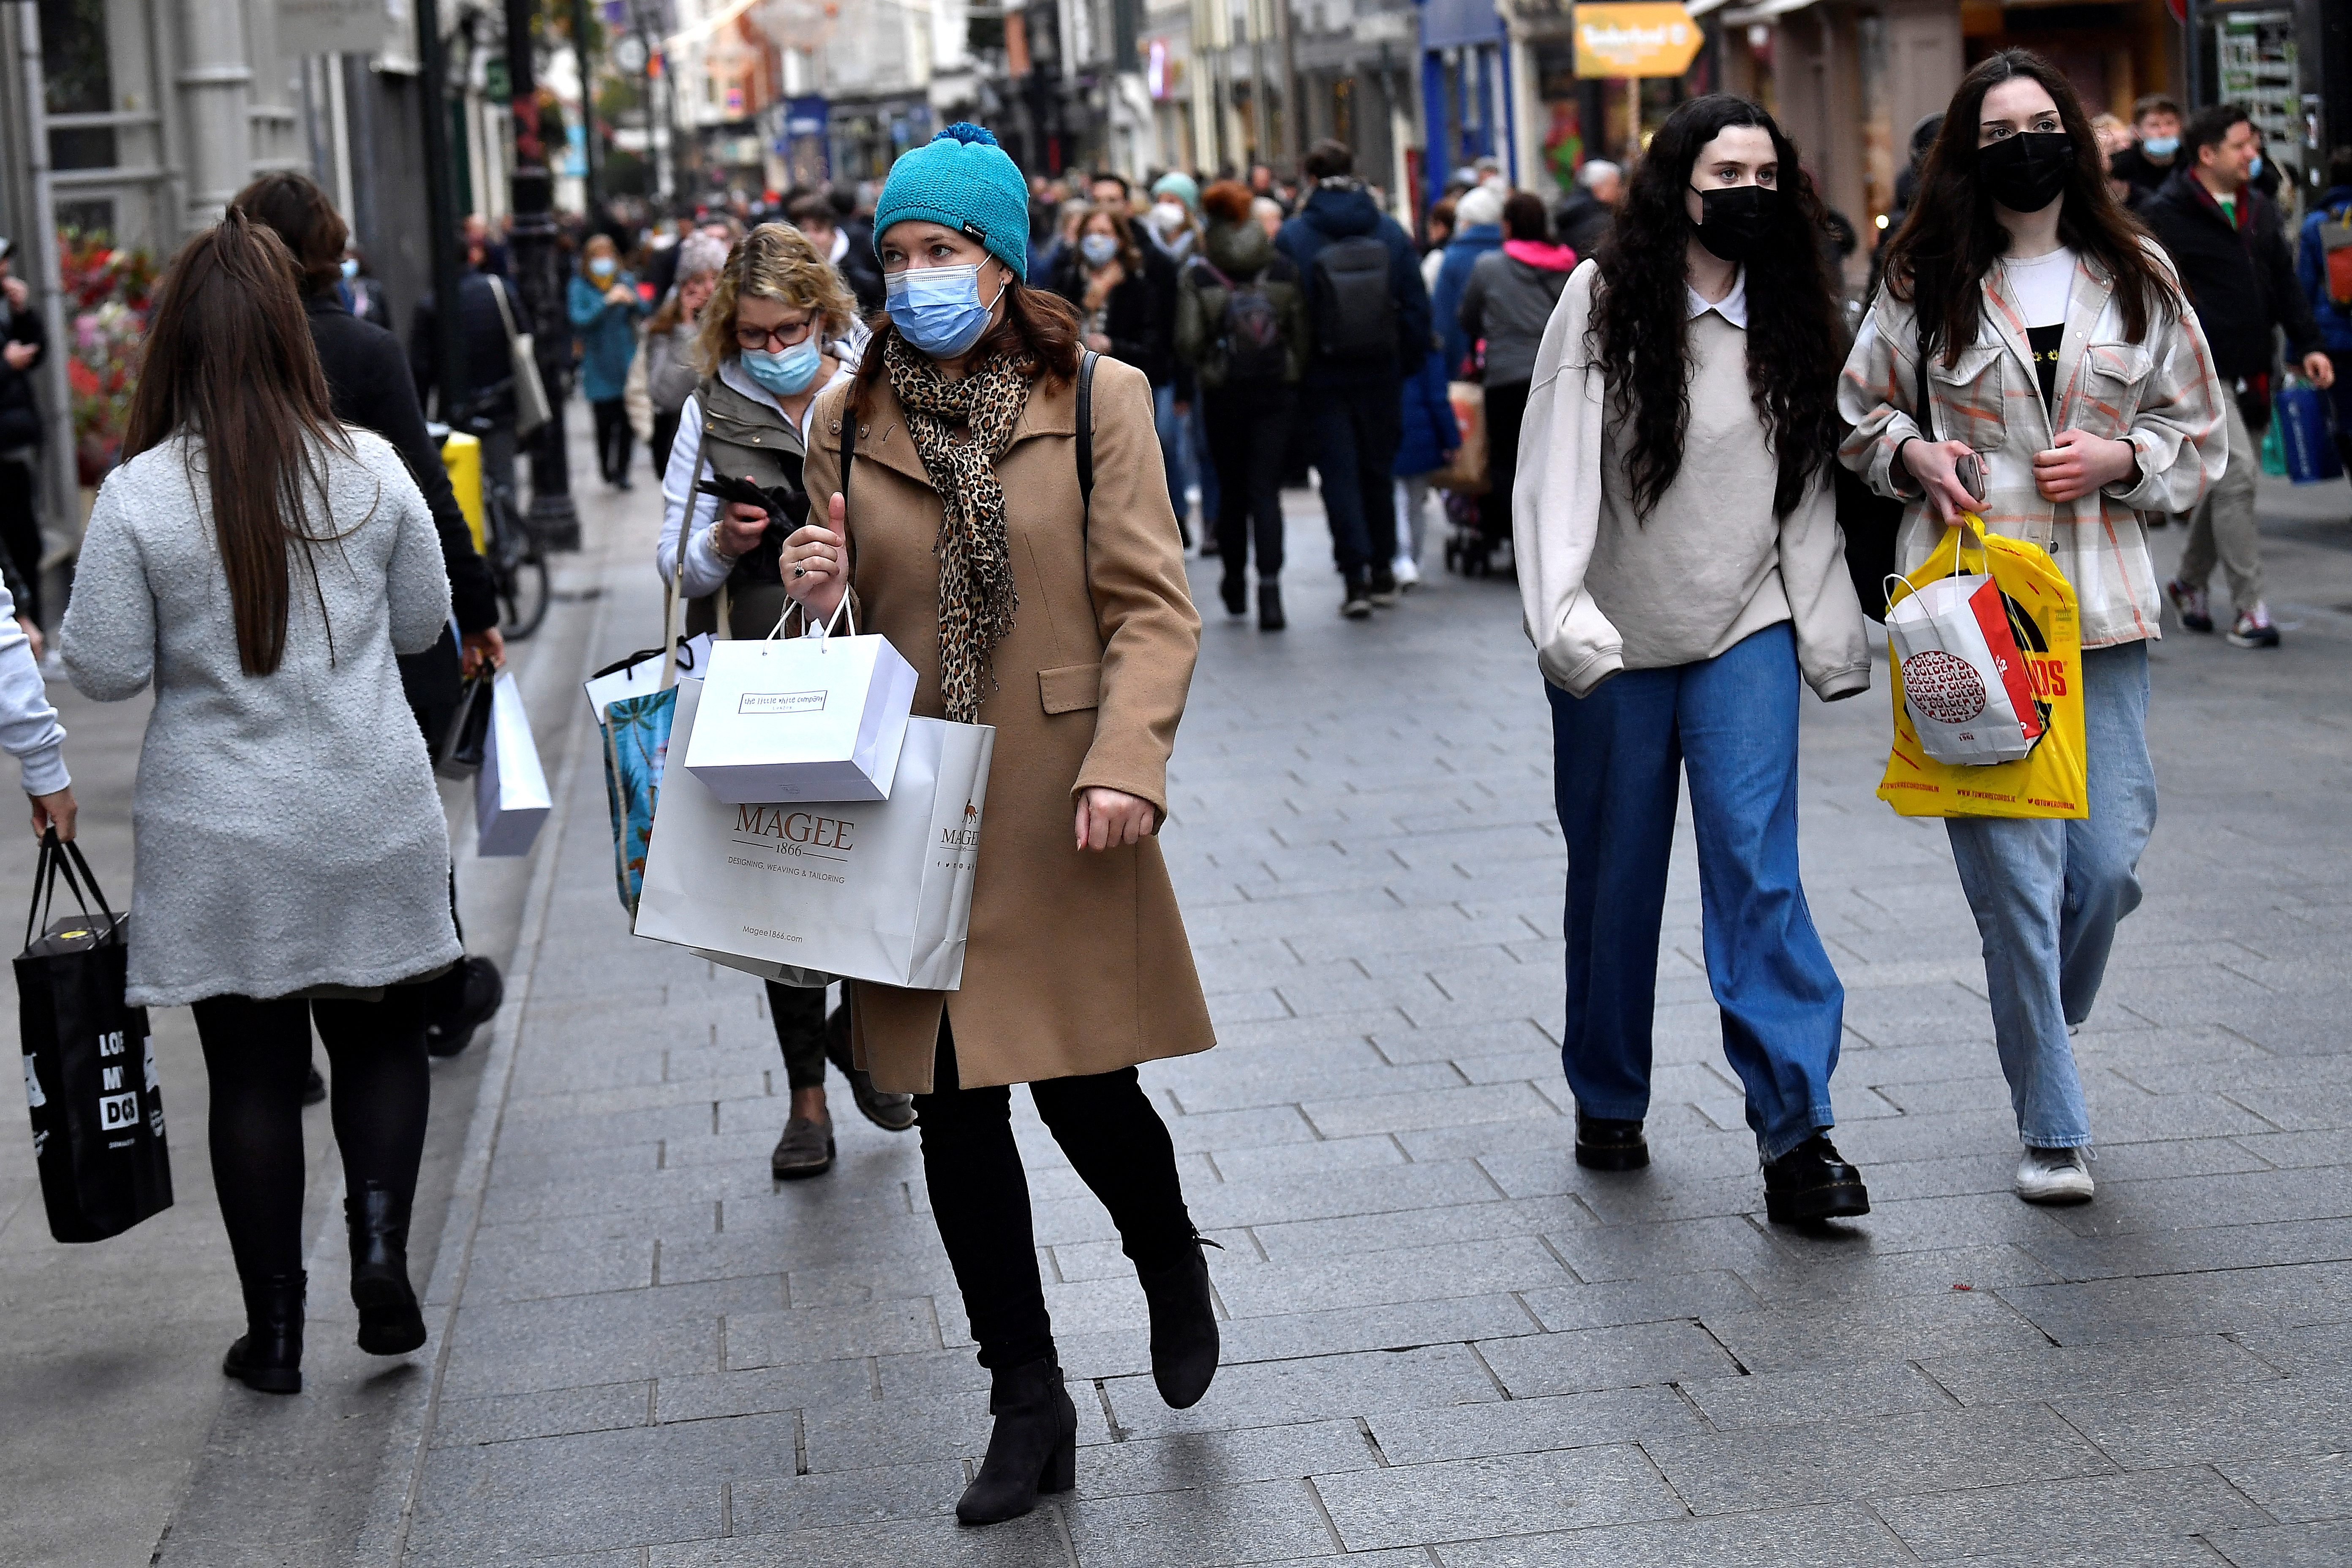 People wear protective face masks while out for Christmas shopping in Dublin